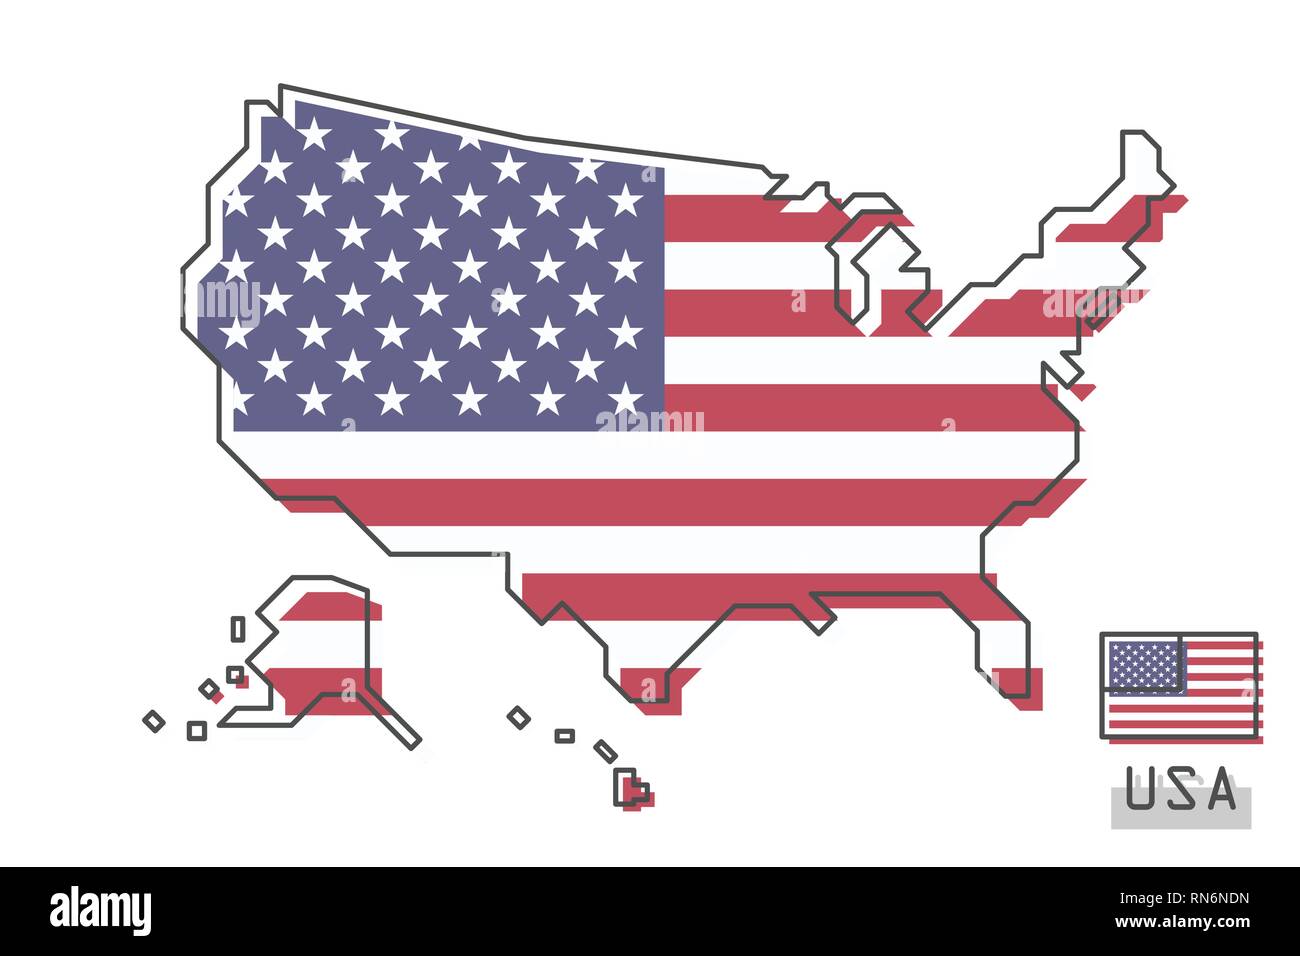 United States Of America Map And Flag Modern Simple Line Cartoon